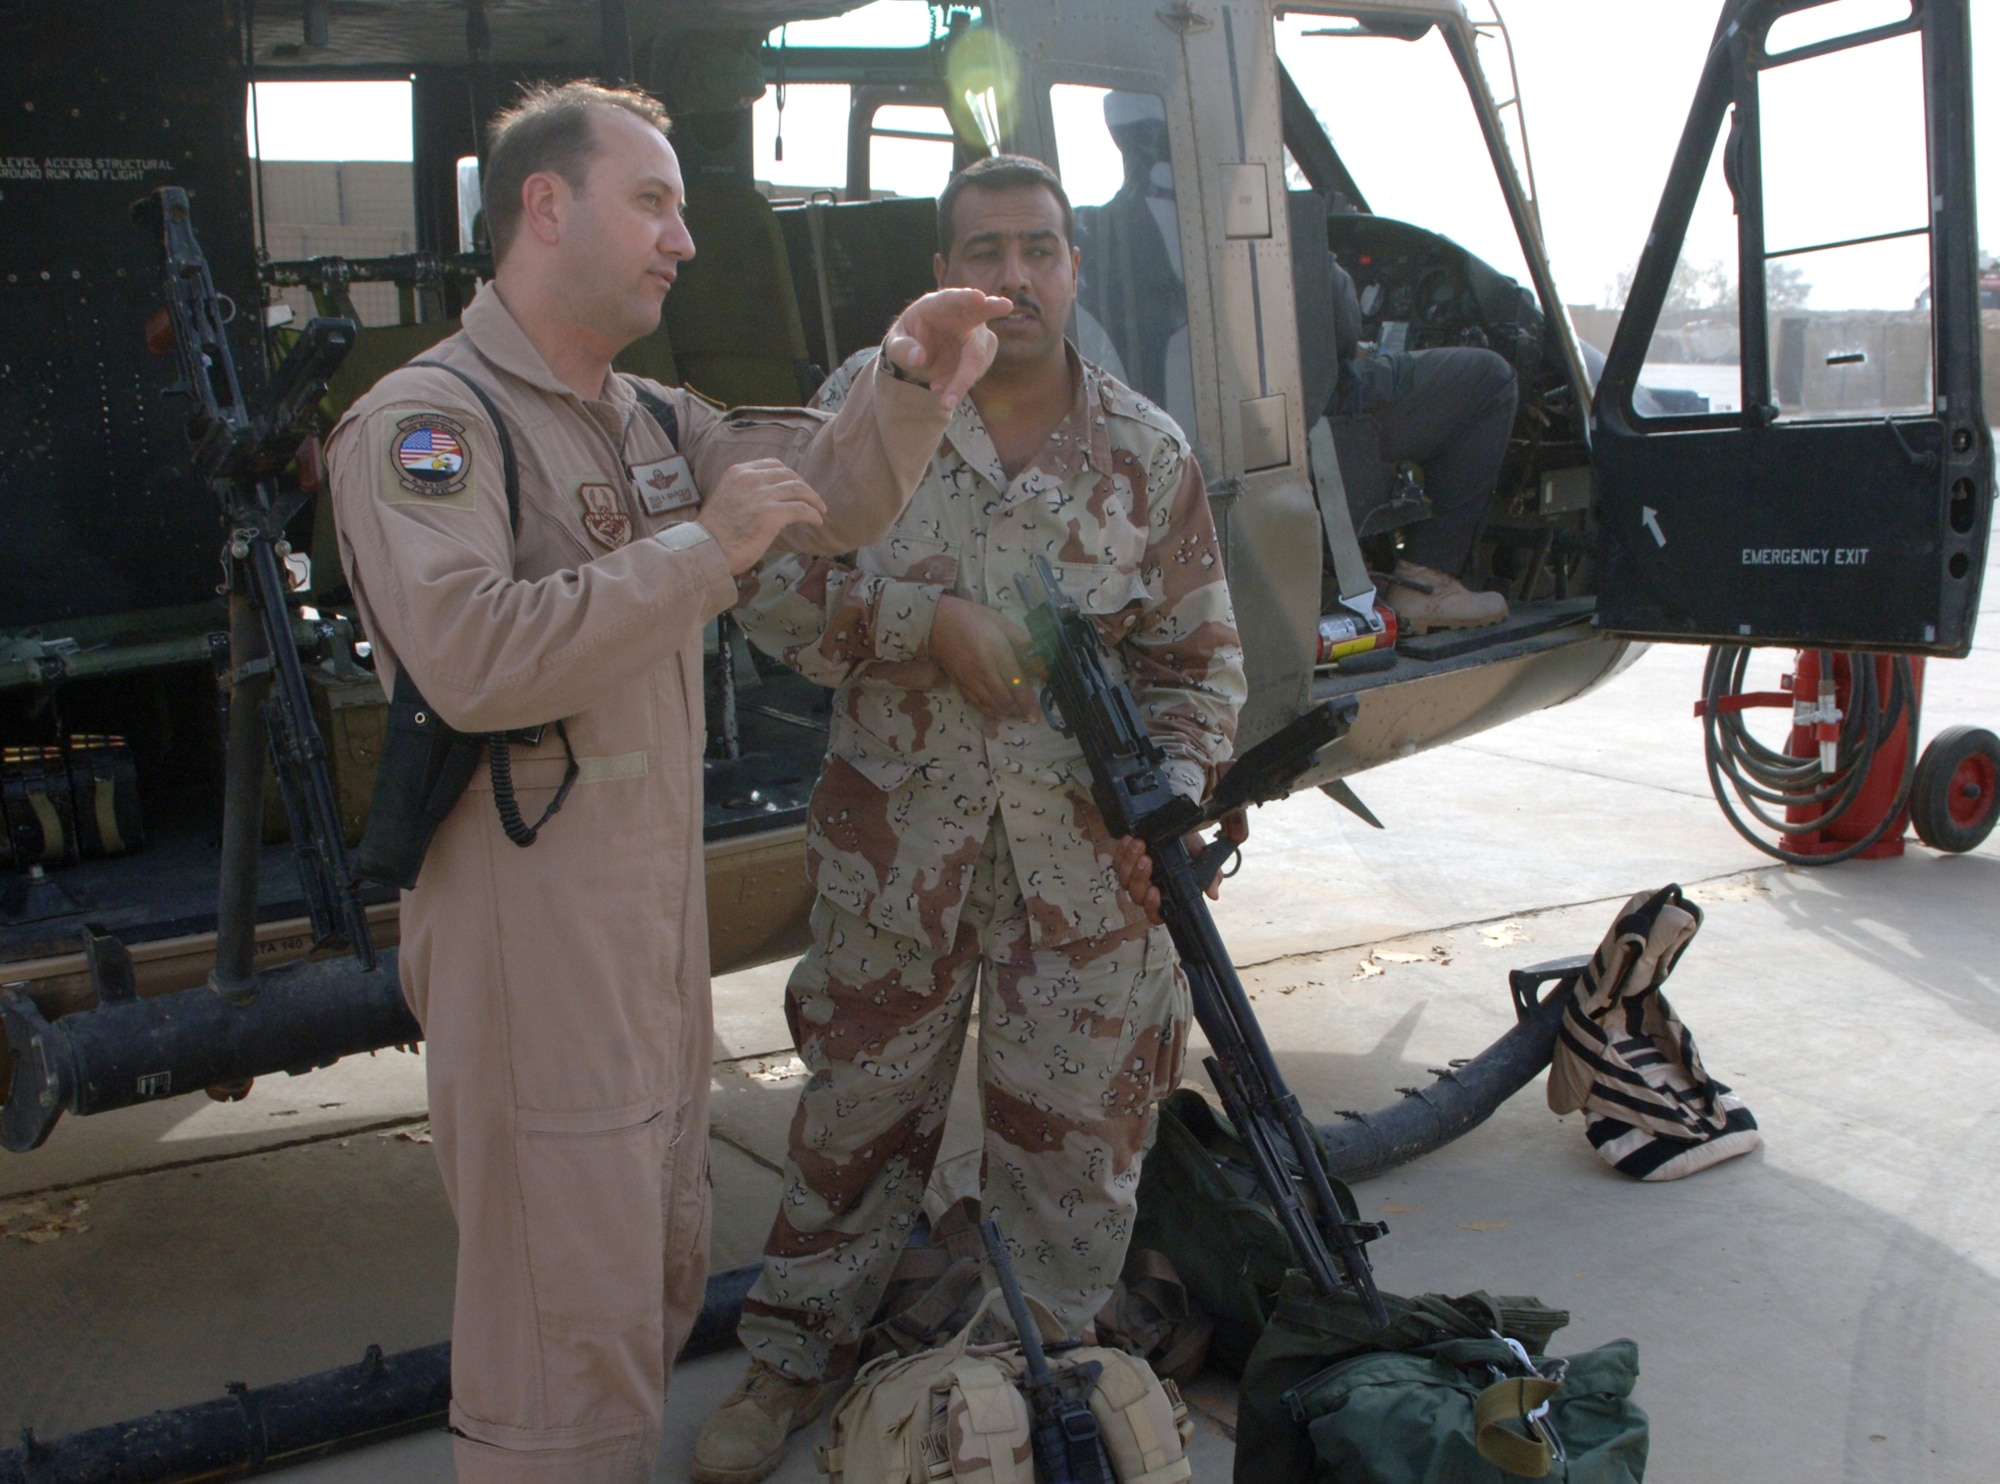 Master Sgt. Dean Marquis discusses a gunnery training mission with Iraqi air force Pvt. Fadhil Faleh at Taji Air Base, Iraq, Sept. 12. Faleh is an apprentice Mi-17 Hip gunner with 2nd Squadron. Marquis, the 770th Air Expeditionary Advisory Squadron's operations superintendent, is deployed from Hurlburt Field, Fla. (U.S. Air Force photo/Tech. Sgt. Richard Lisum)